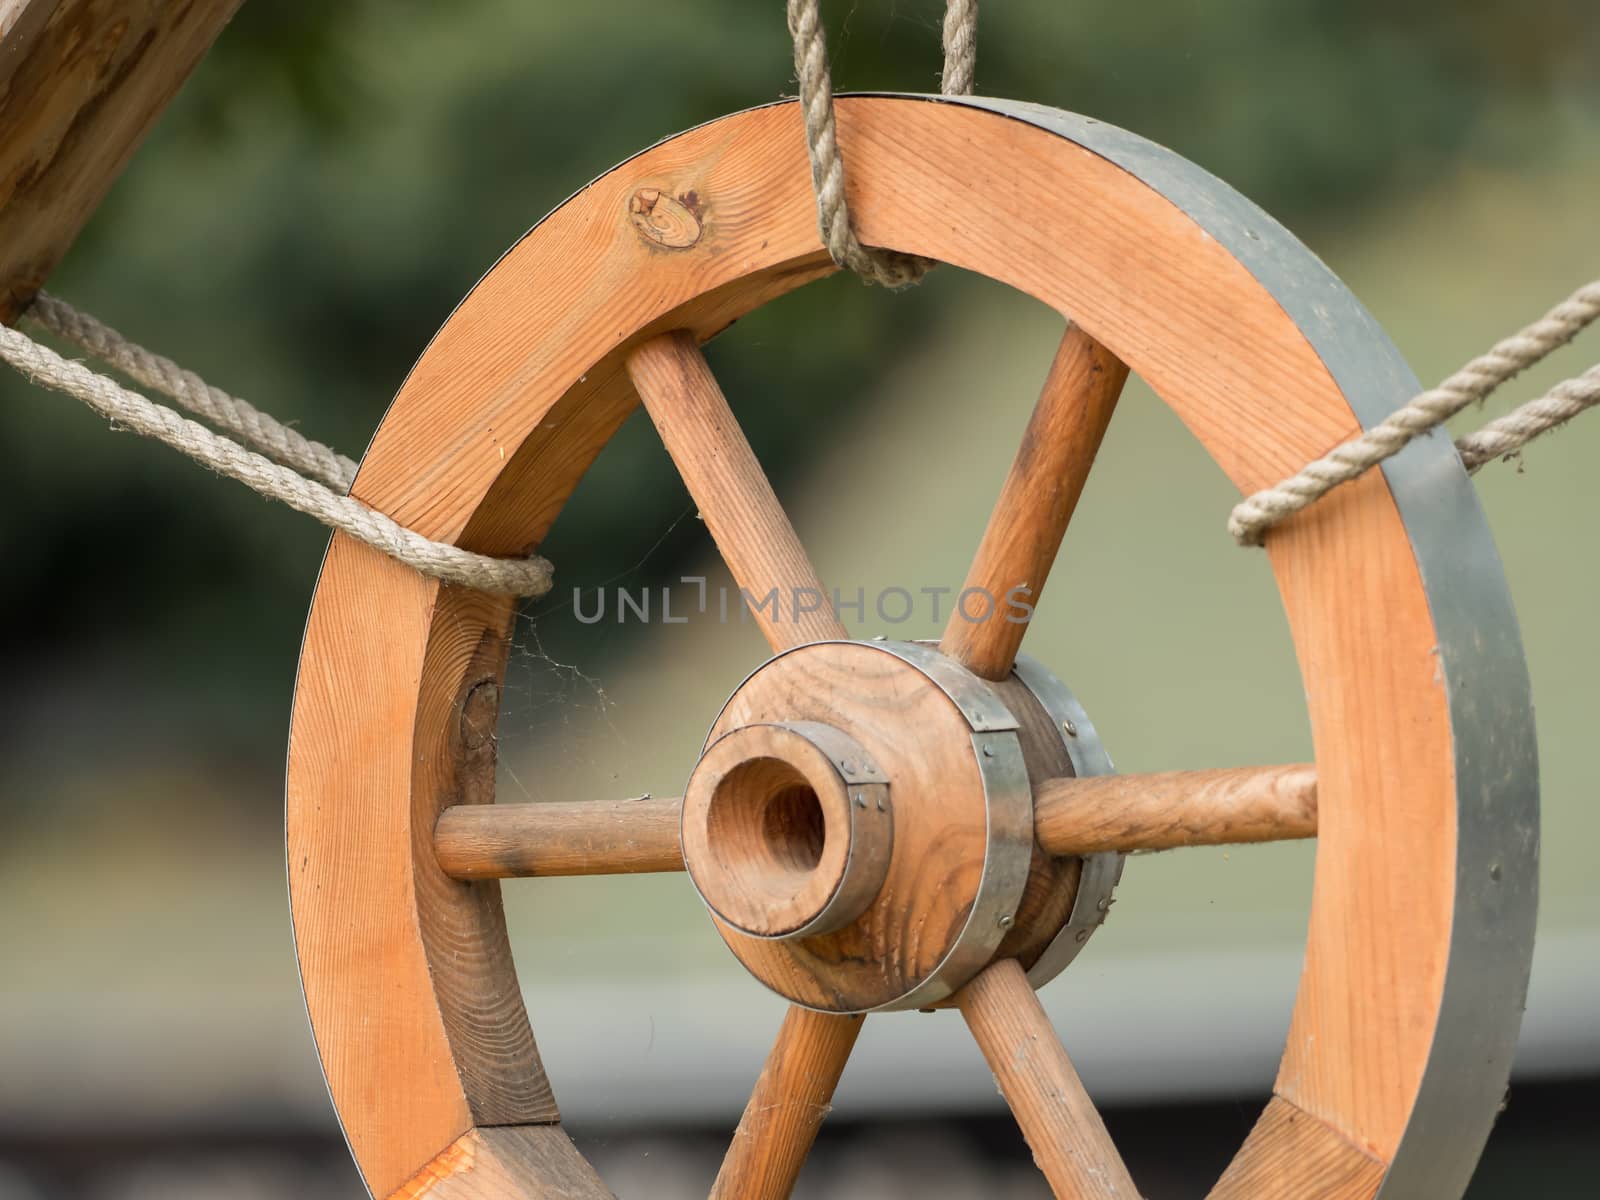 A wooden wheel hangs out as a decoration by sandra_fotodesign